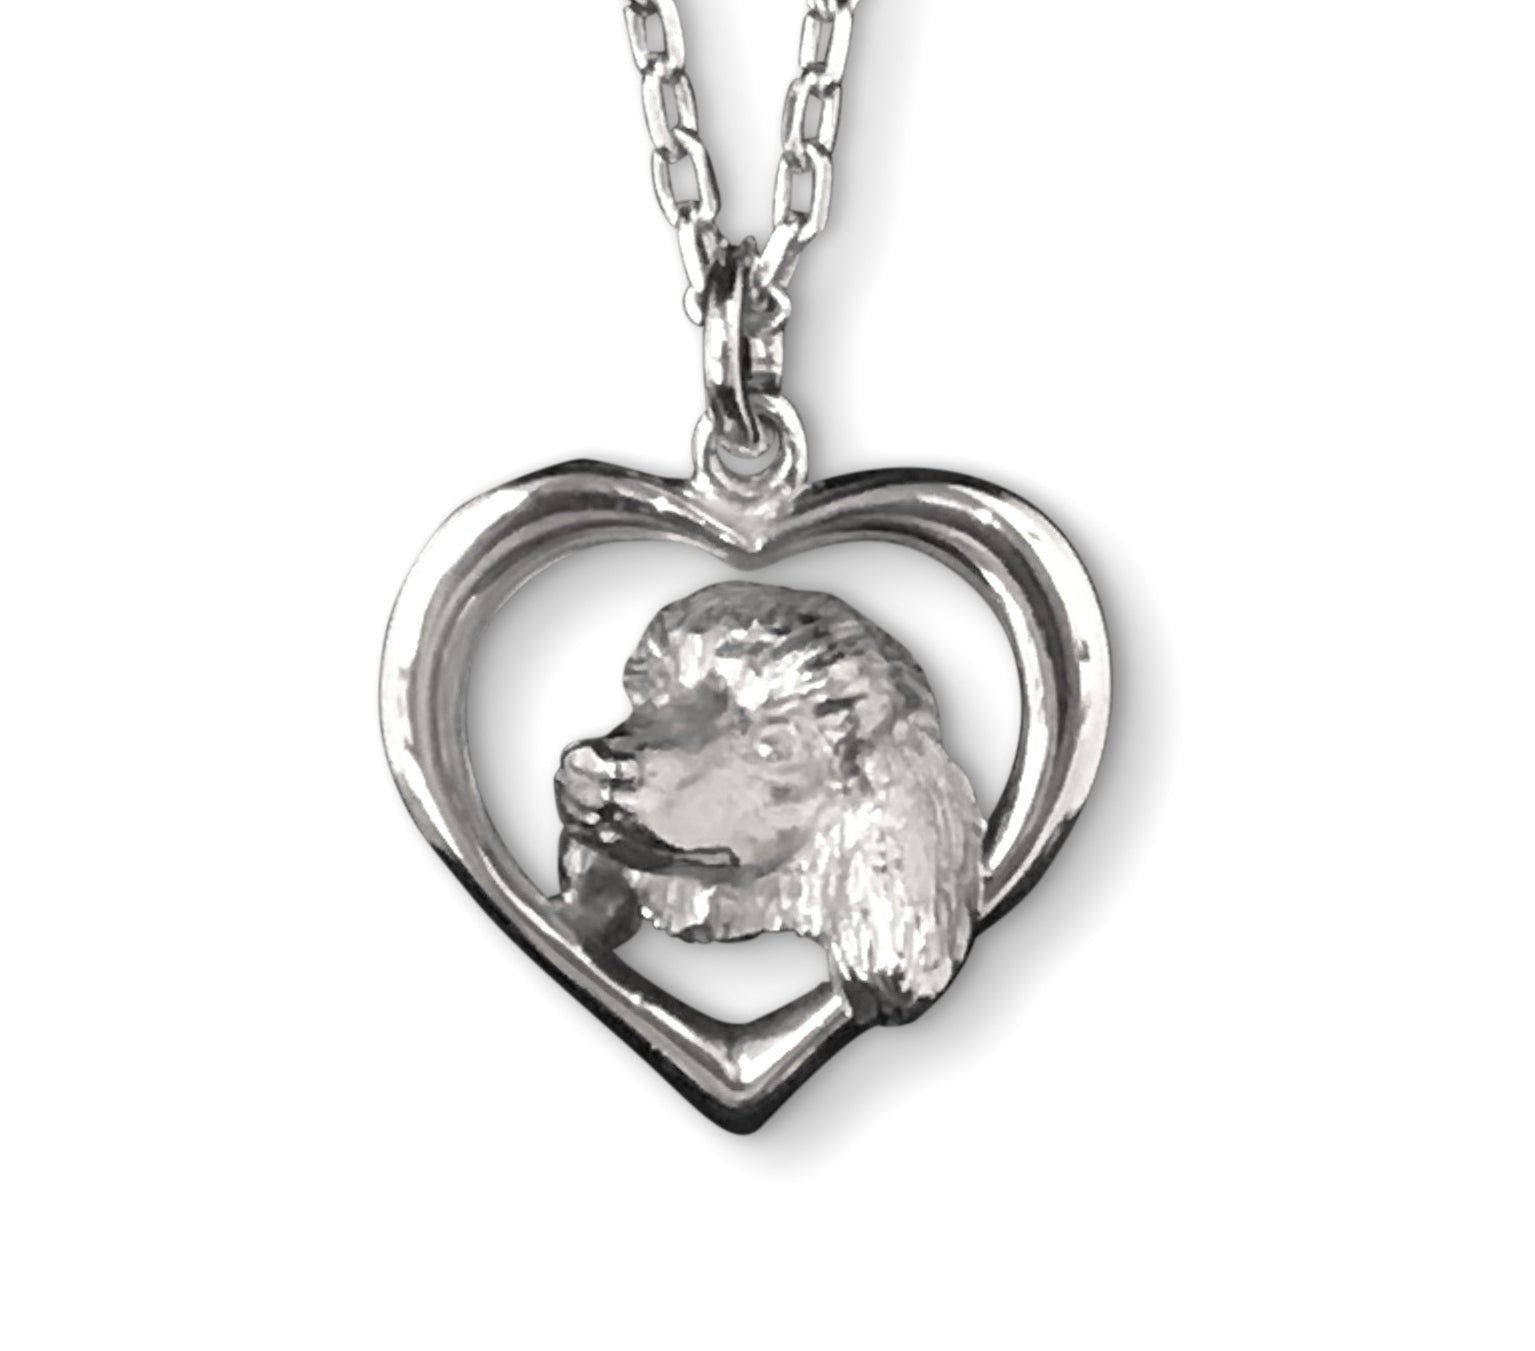 Poodle in a Heart Pendant by Paul Eaton Sculptor